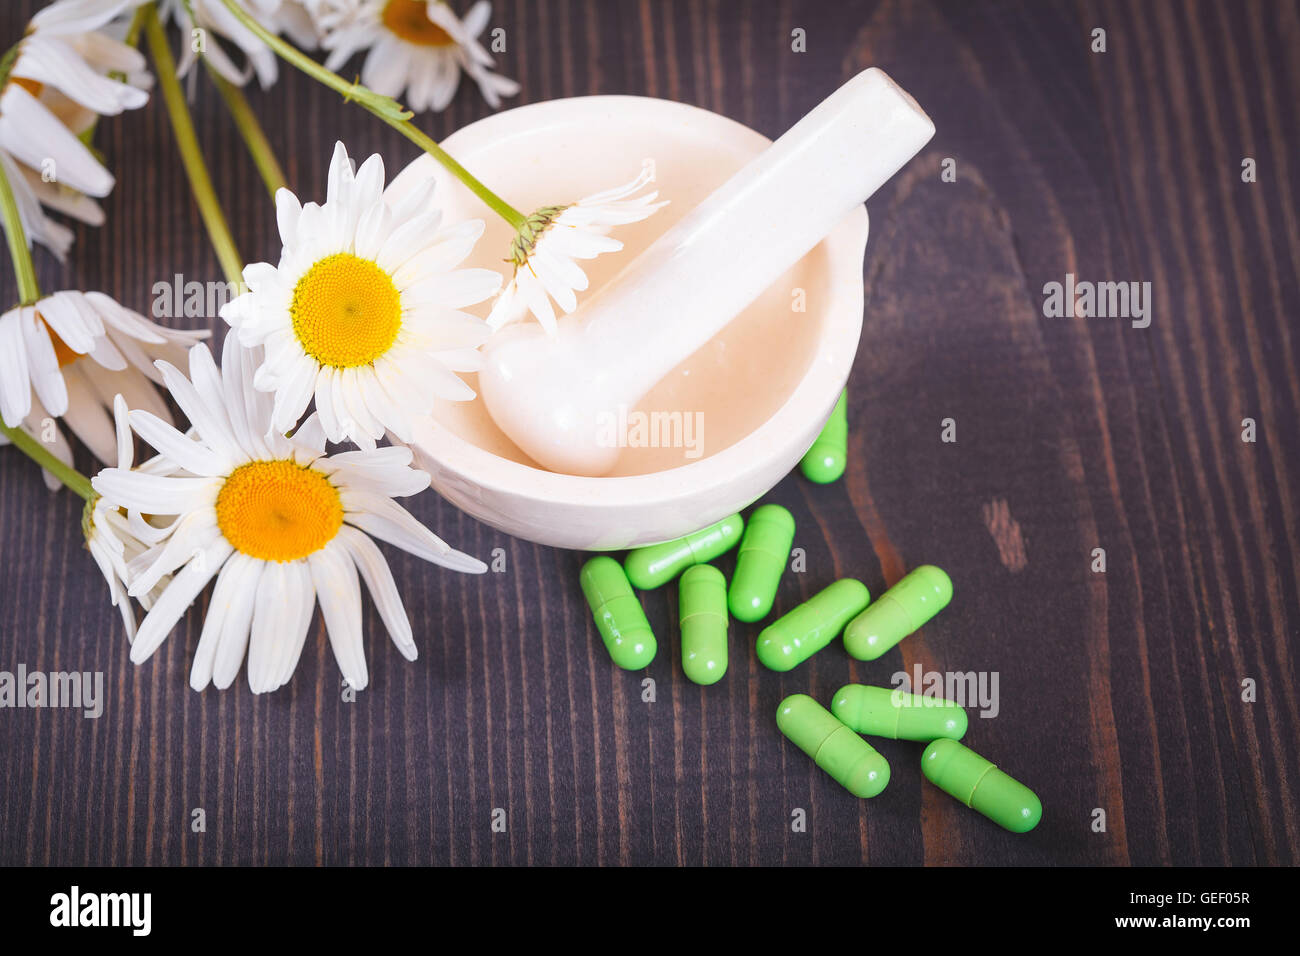 Chamomile flowers and green phytotherapeutic capsules on a wooden table. Herbal medicine and health Stock Photo